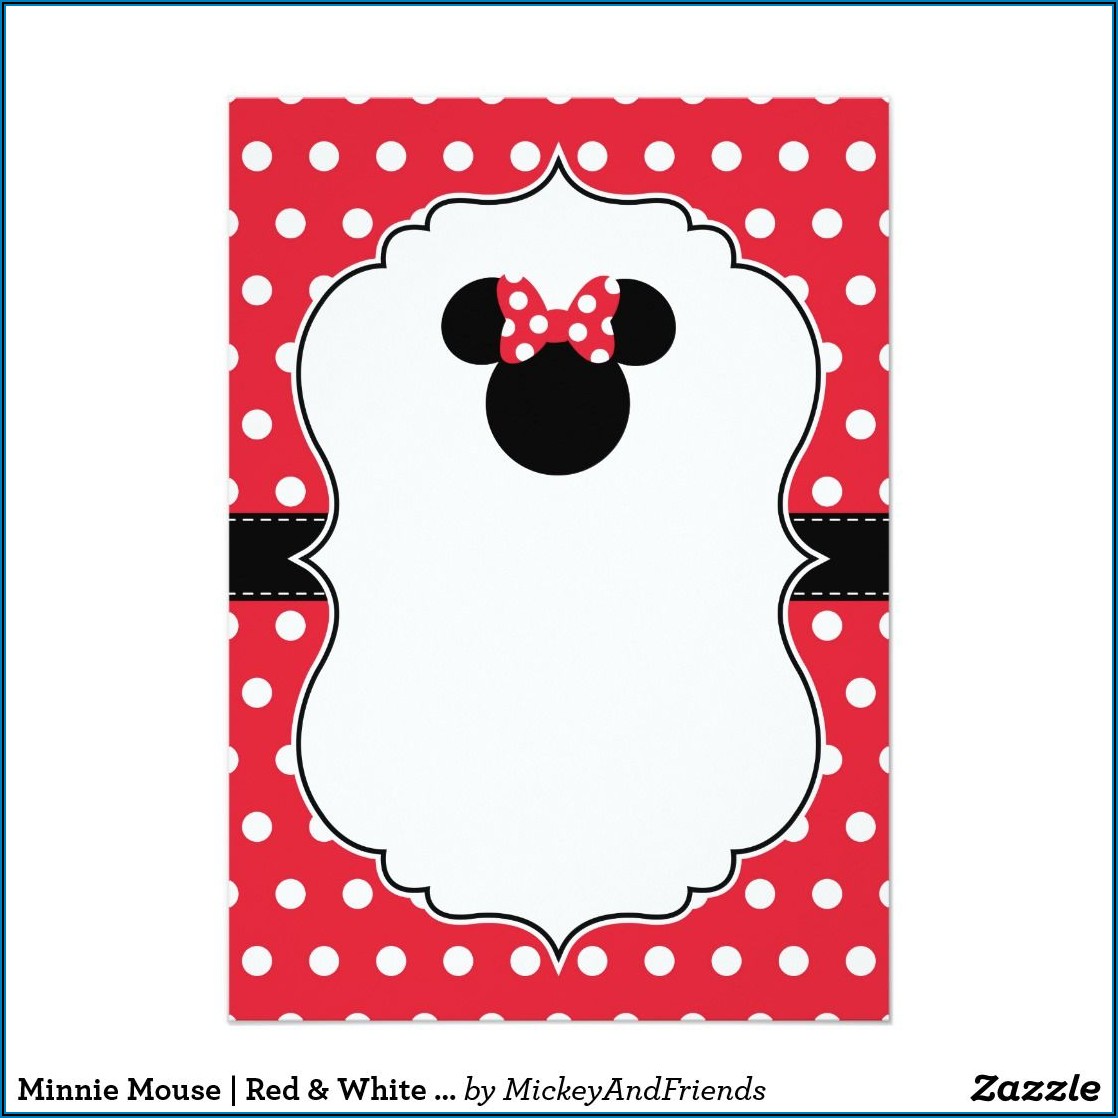 Create Your Own Minnie Mouse Invitations